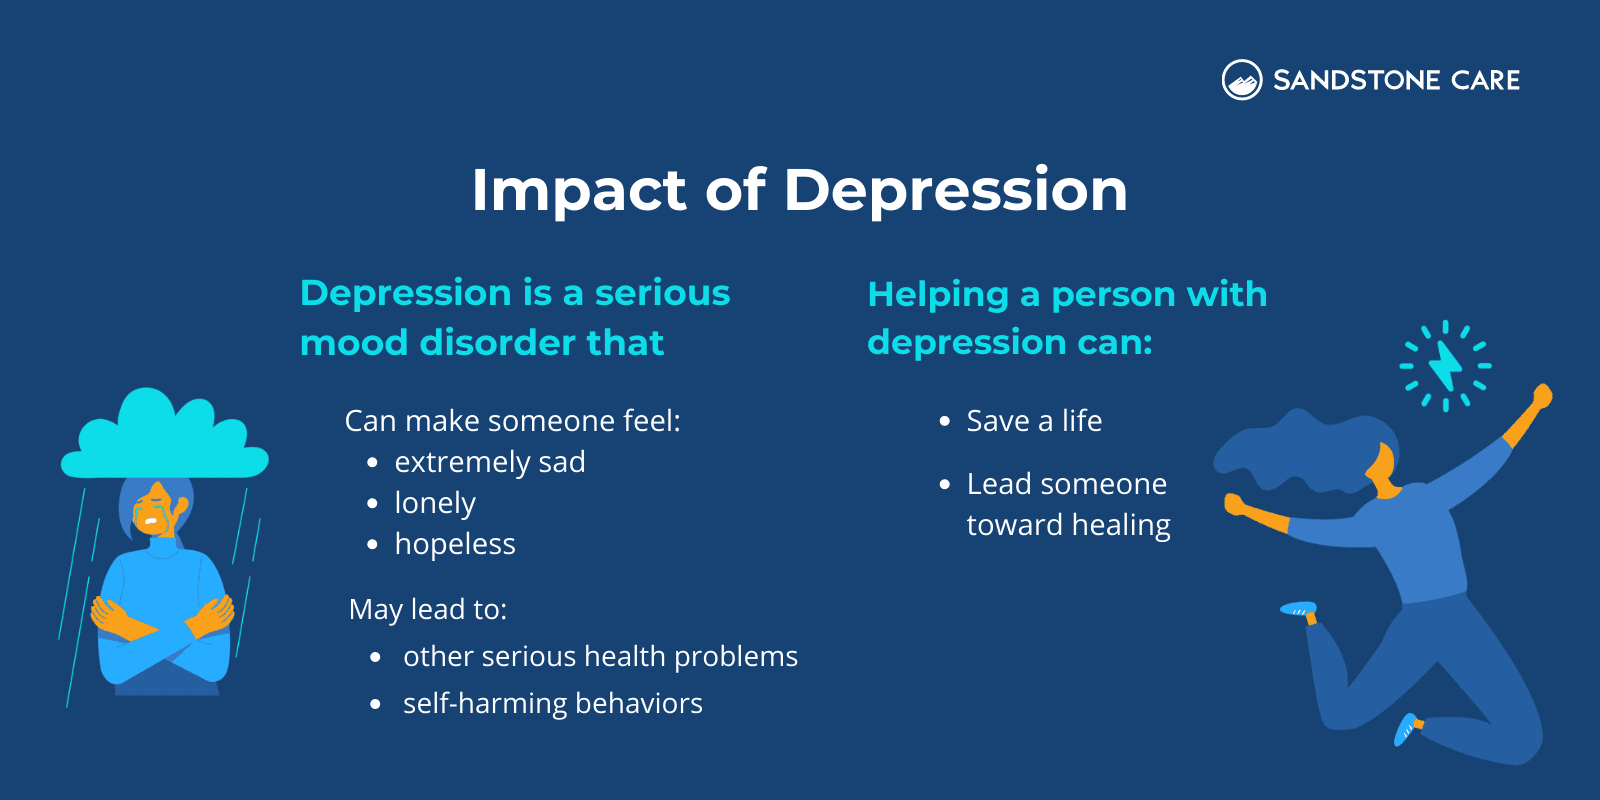 "Impact of Depression in People" illustrated with relevant graphics and why helping a person with depression is important in saving a life and leading someone toward healing